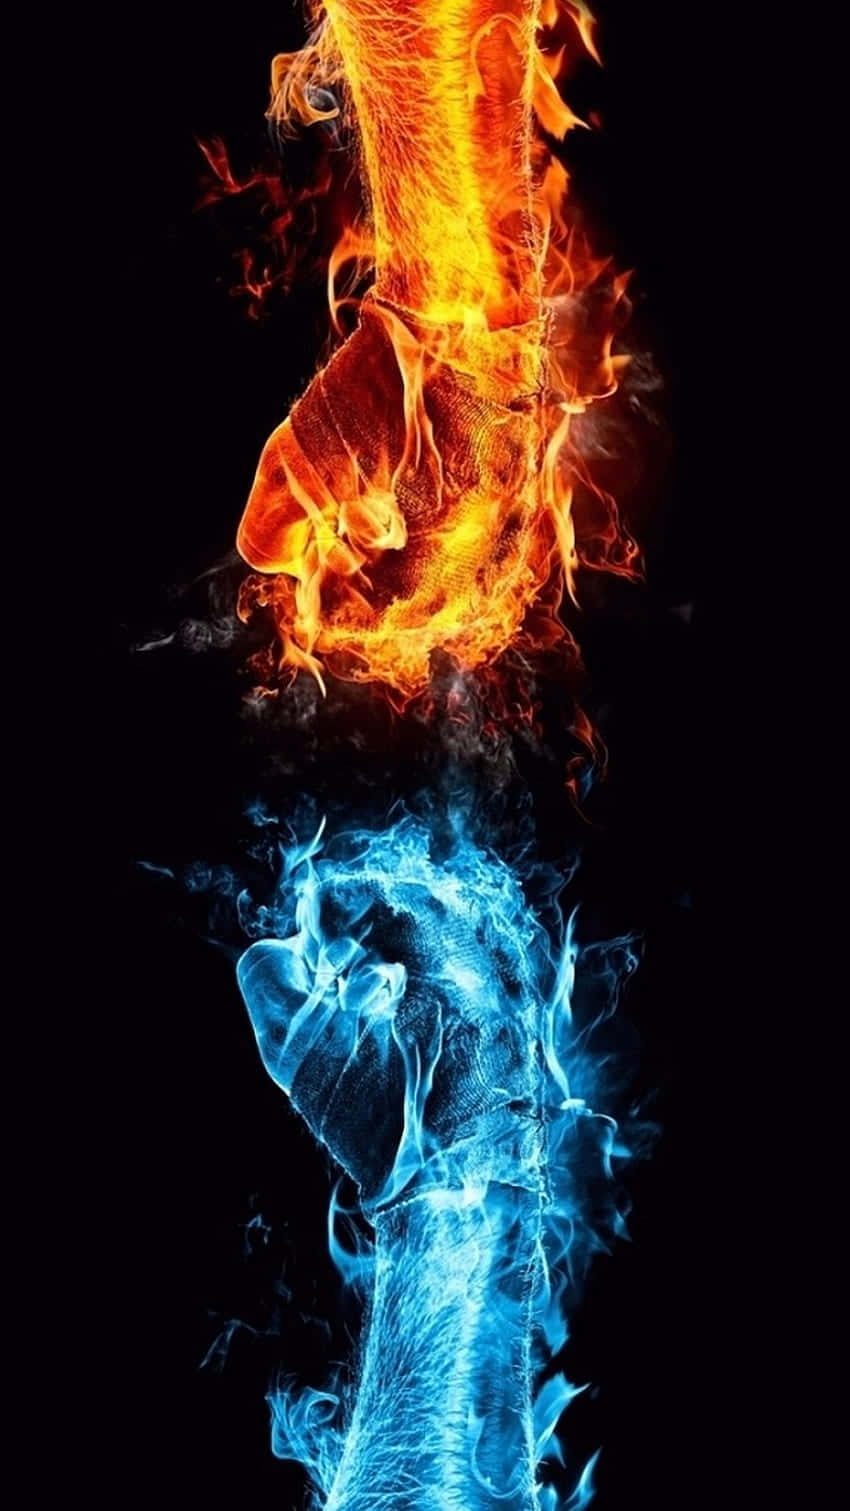 Experience the vivid intensity of Red and Blue Fire Wallpaper